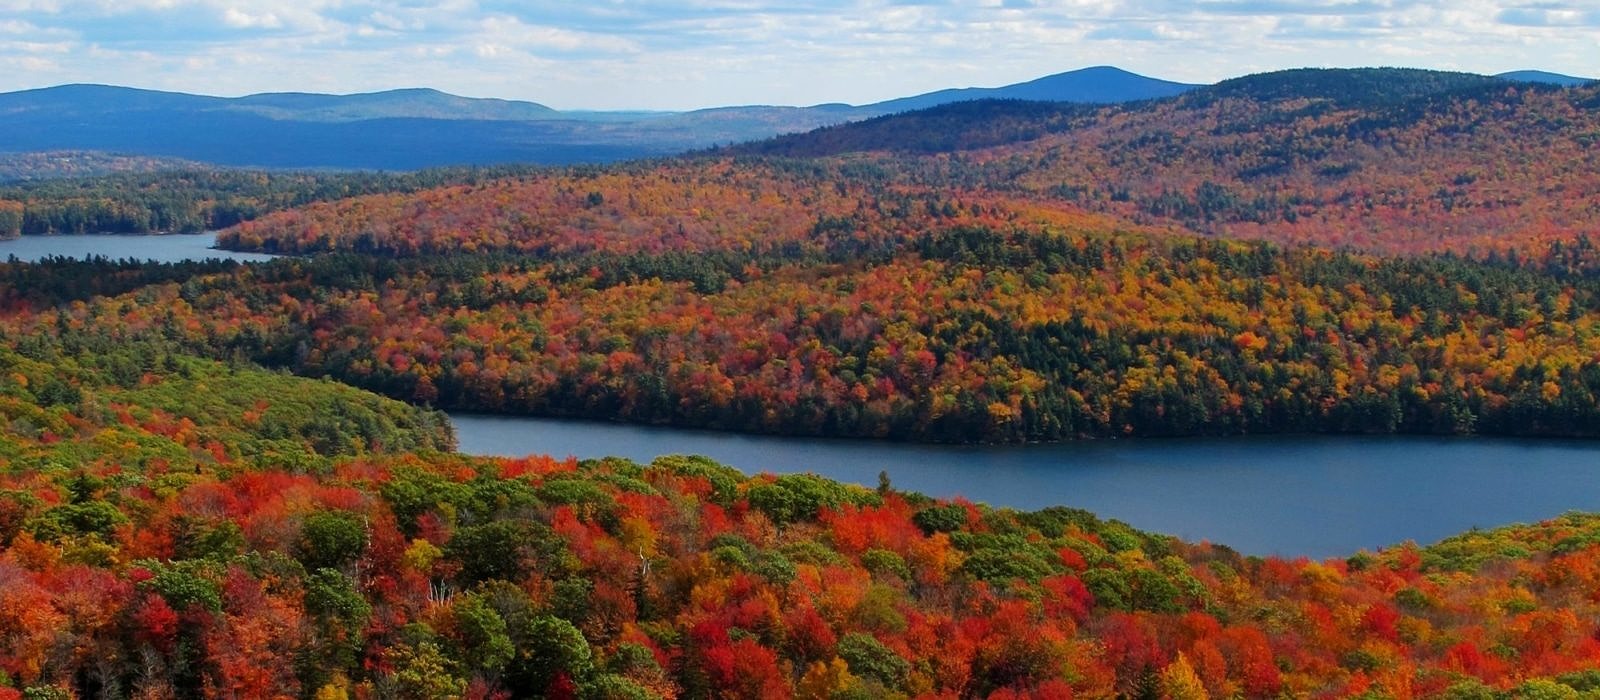 A scenic view of Spoonwood Pond and surround woodlands in fall foliage. (photo © Brett Amy Thelen)